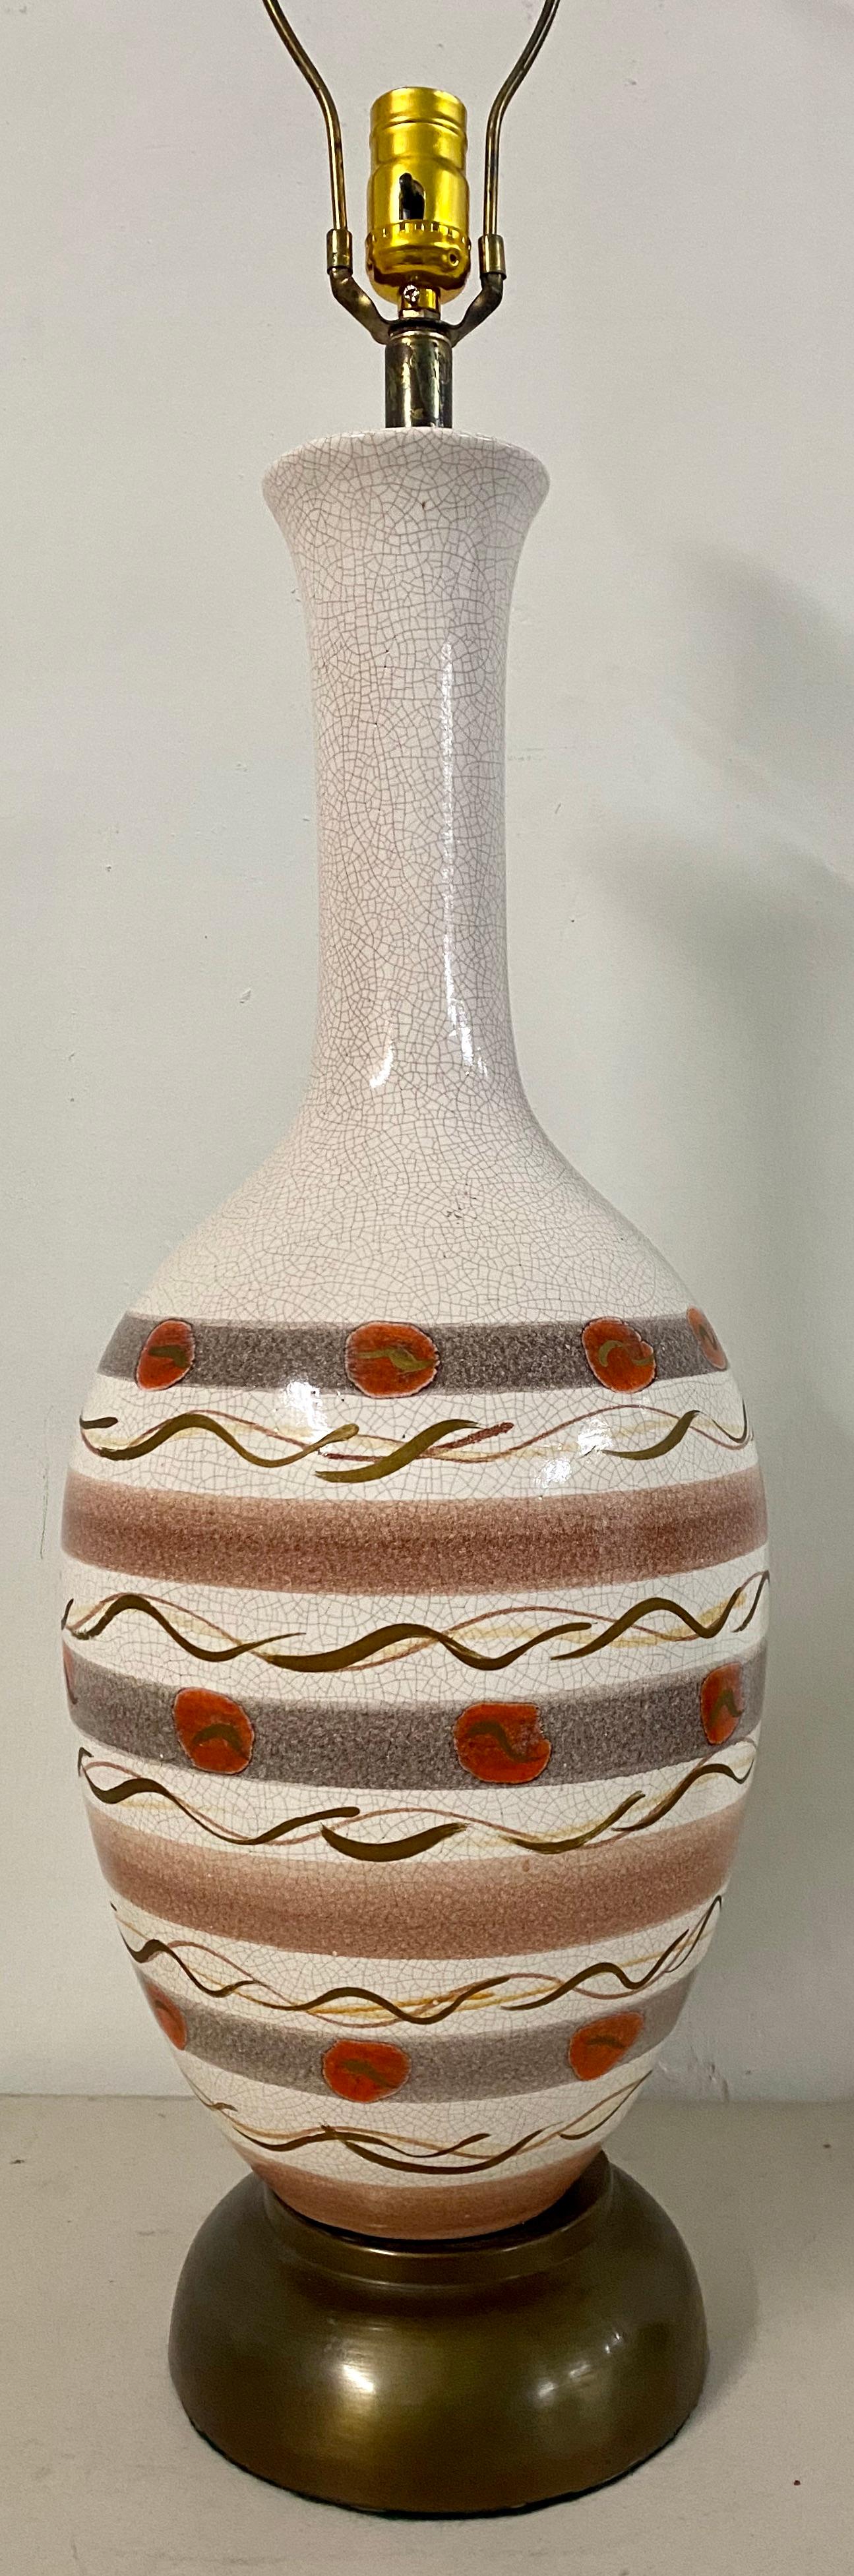 American Mid-Century Modern Crackle Glaze and Hand Painted Table Lamp, circa 1950s For Sale